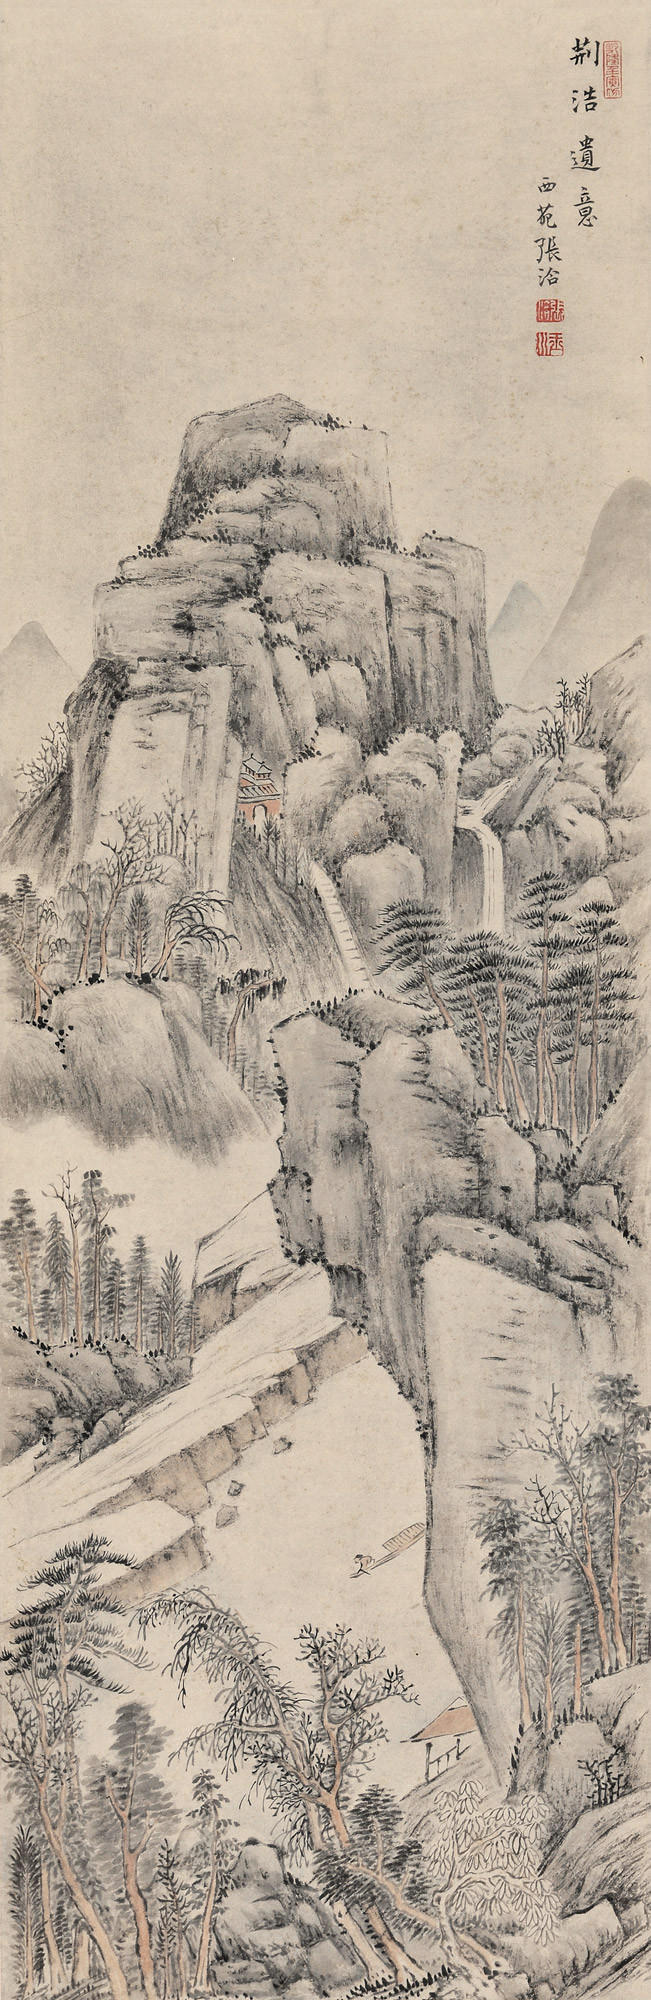 LANDSCAPE IN THE STYLE OF JINGHAO